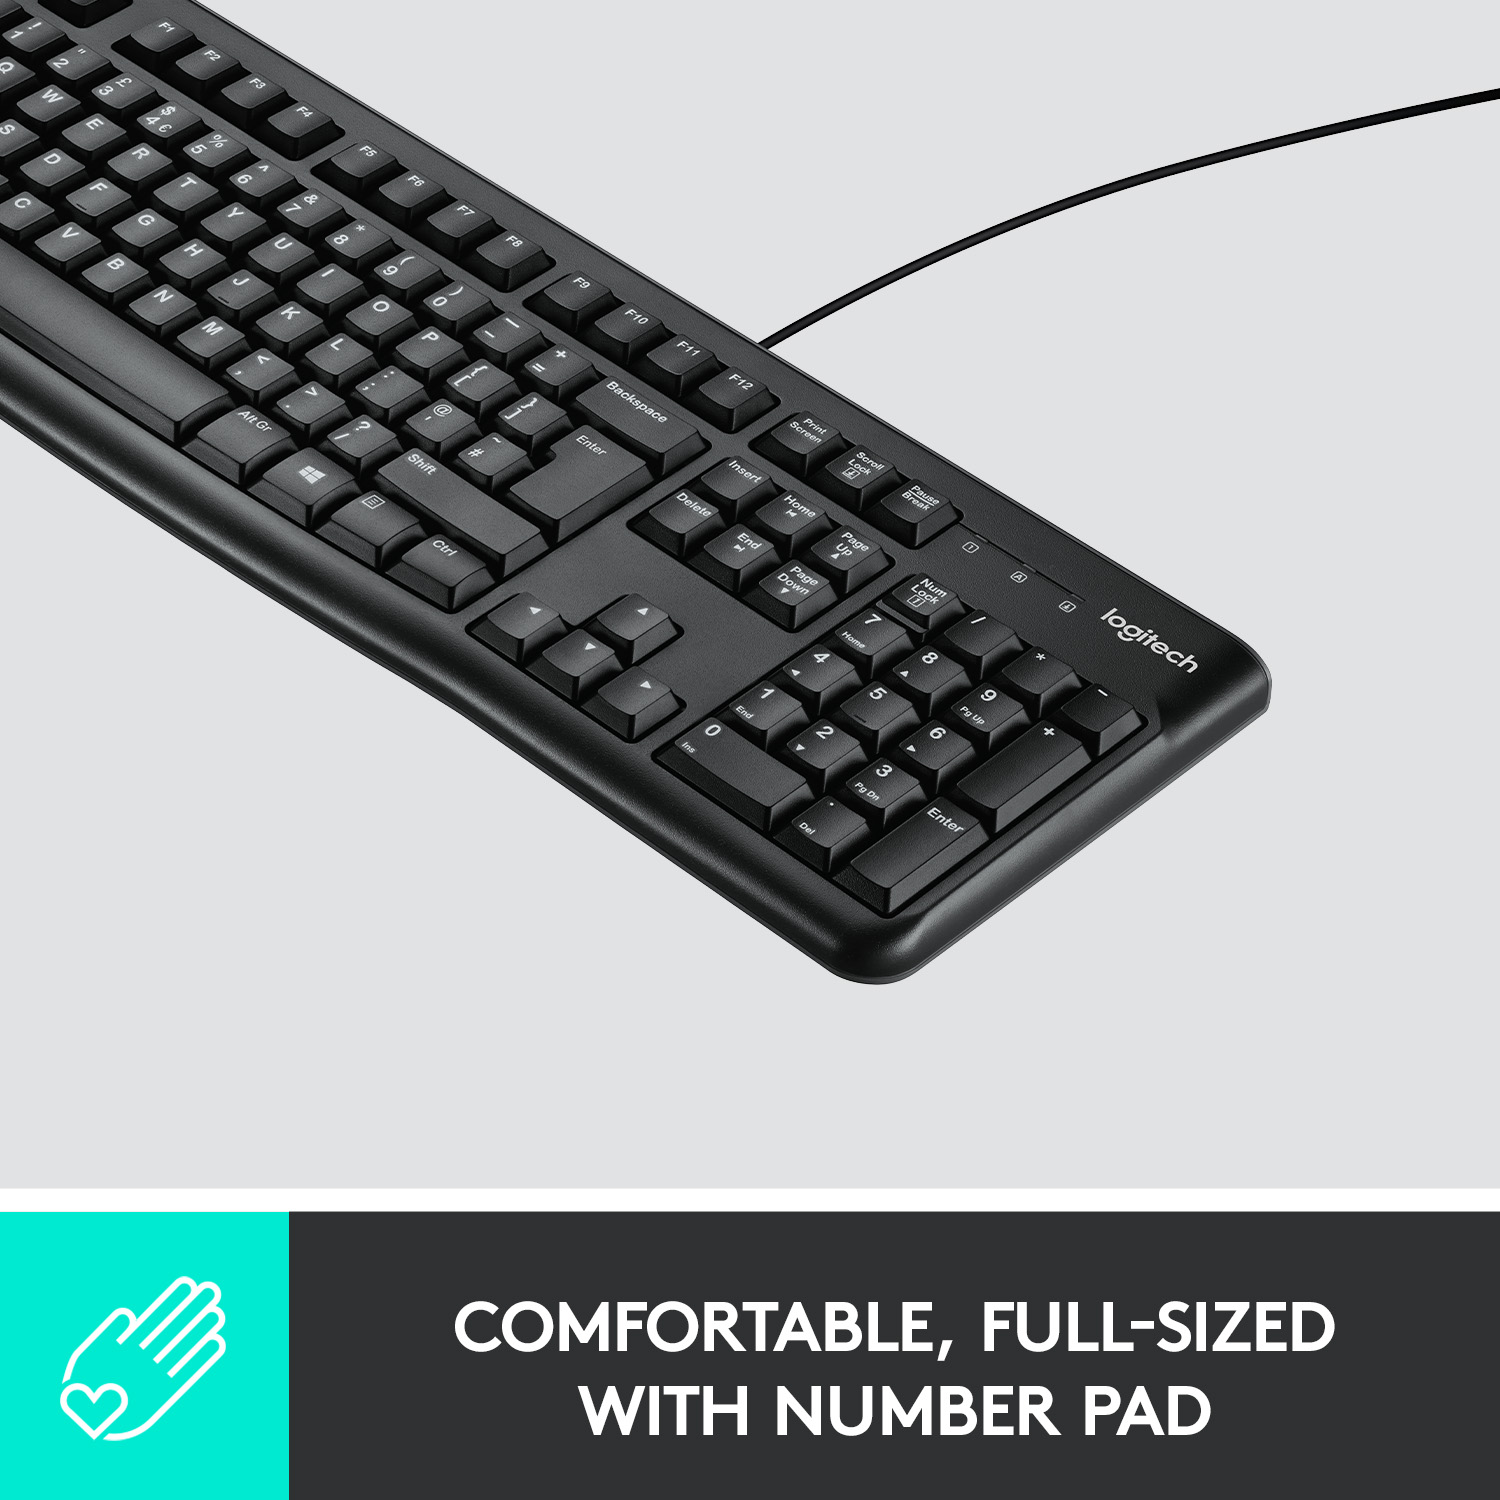 Logitech K120 Wired Keyboard for Windows, USB Plug-and-Play, Full-Size, Spill-Resistant, Curved Space Bar, Compatible with PC, Laptop, Black - image 2 of 7